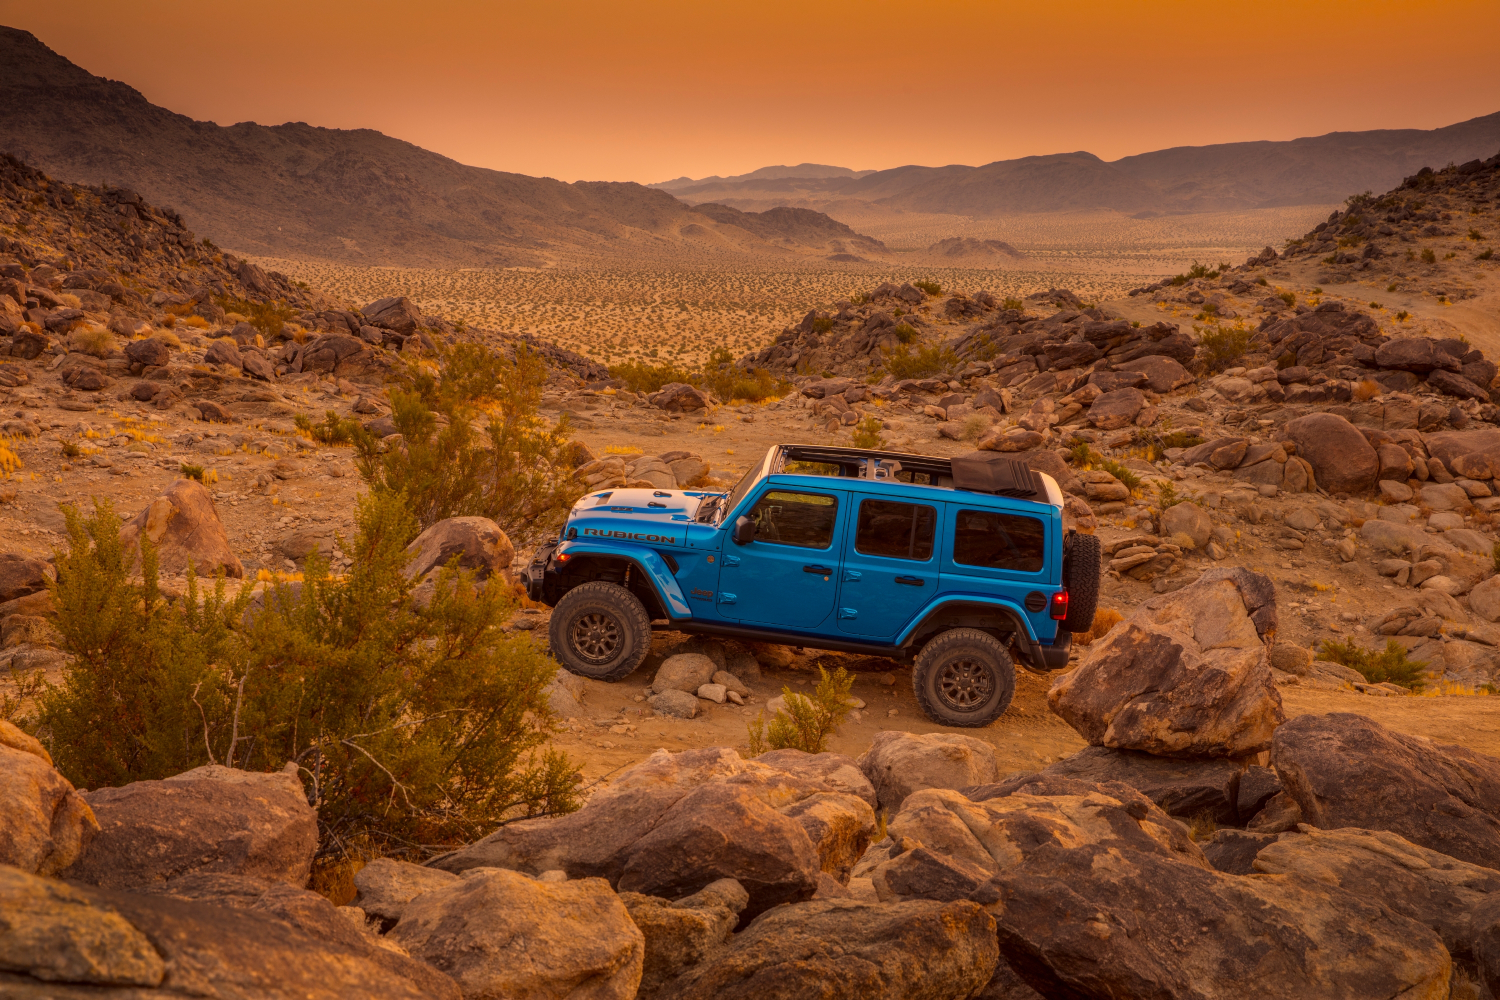 The coolest SUVs under $30,000 for 2022 includes the Jeep Wrangler like this one